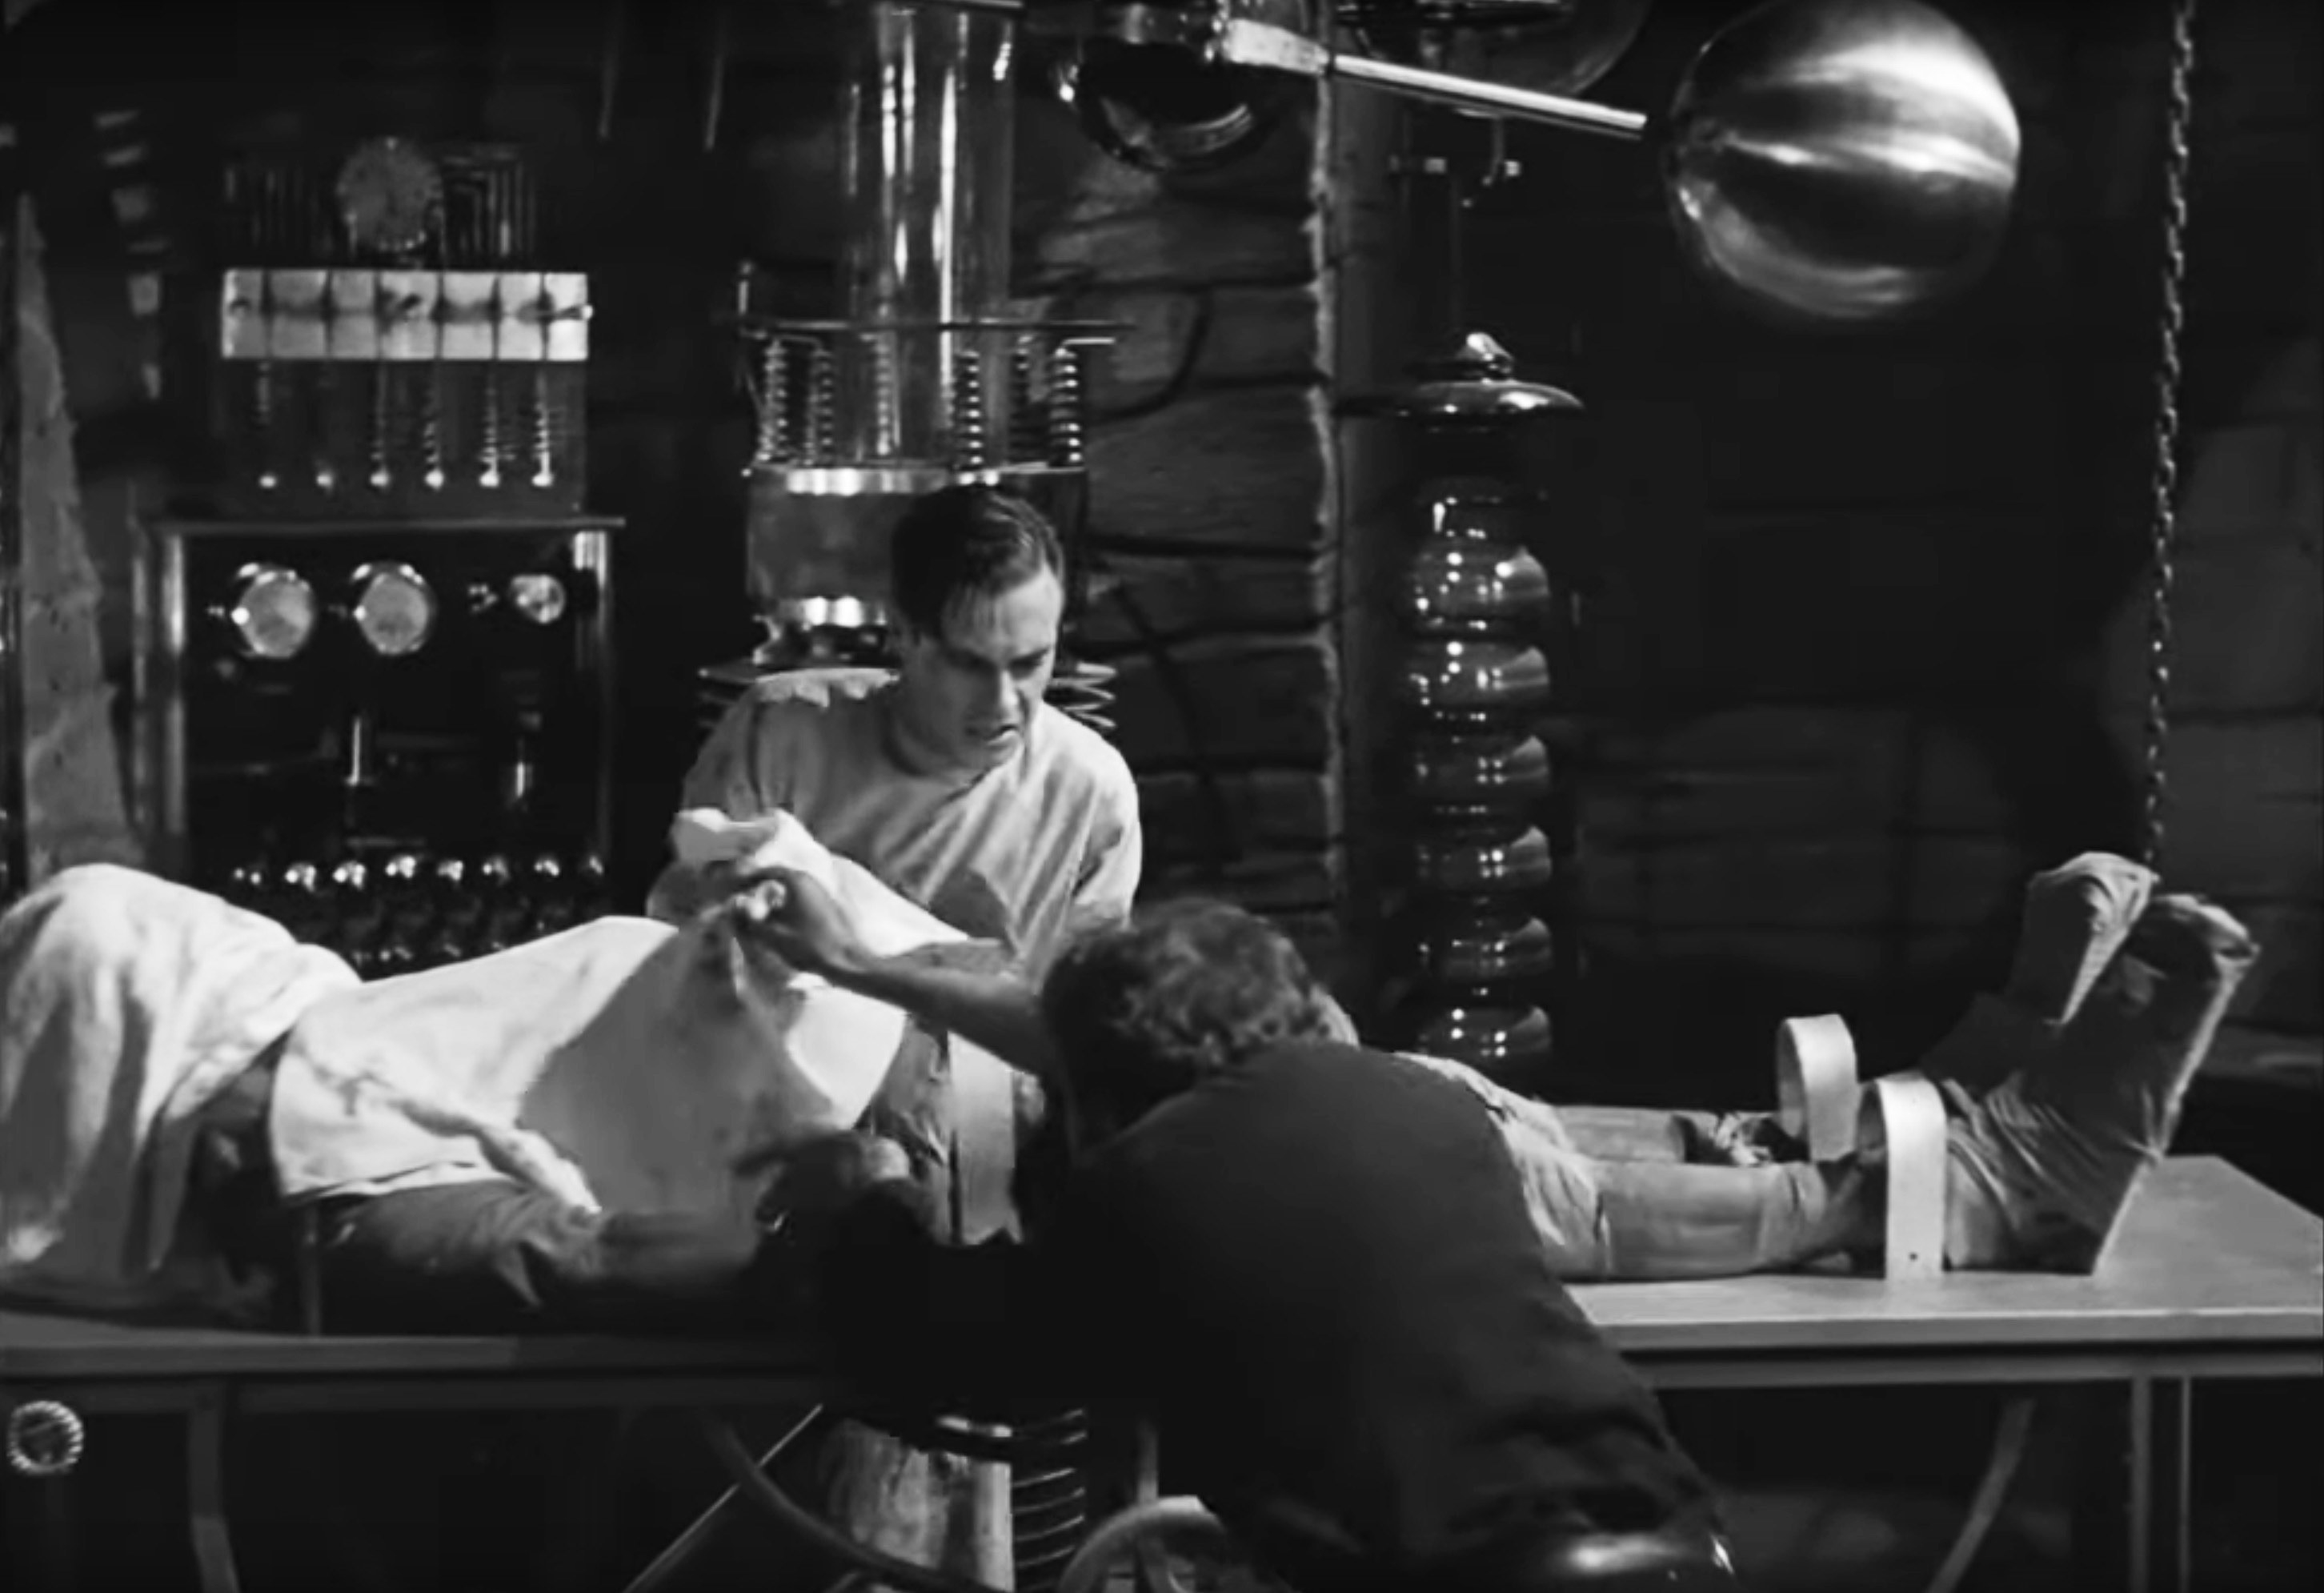 Dr. Frankenstein pulling back a sheet to look at the monster